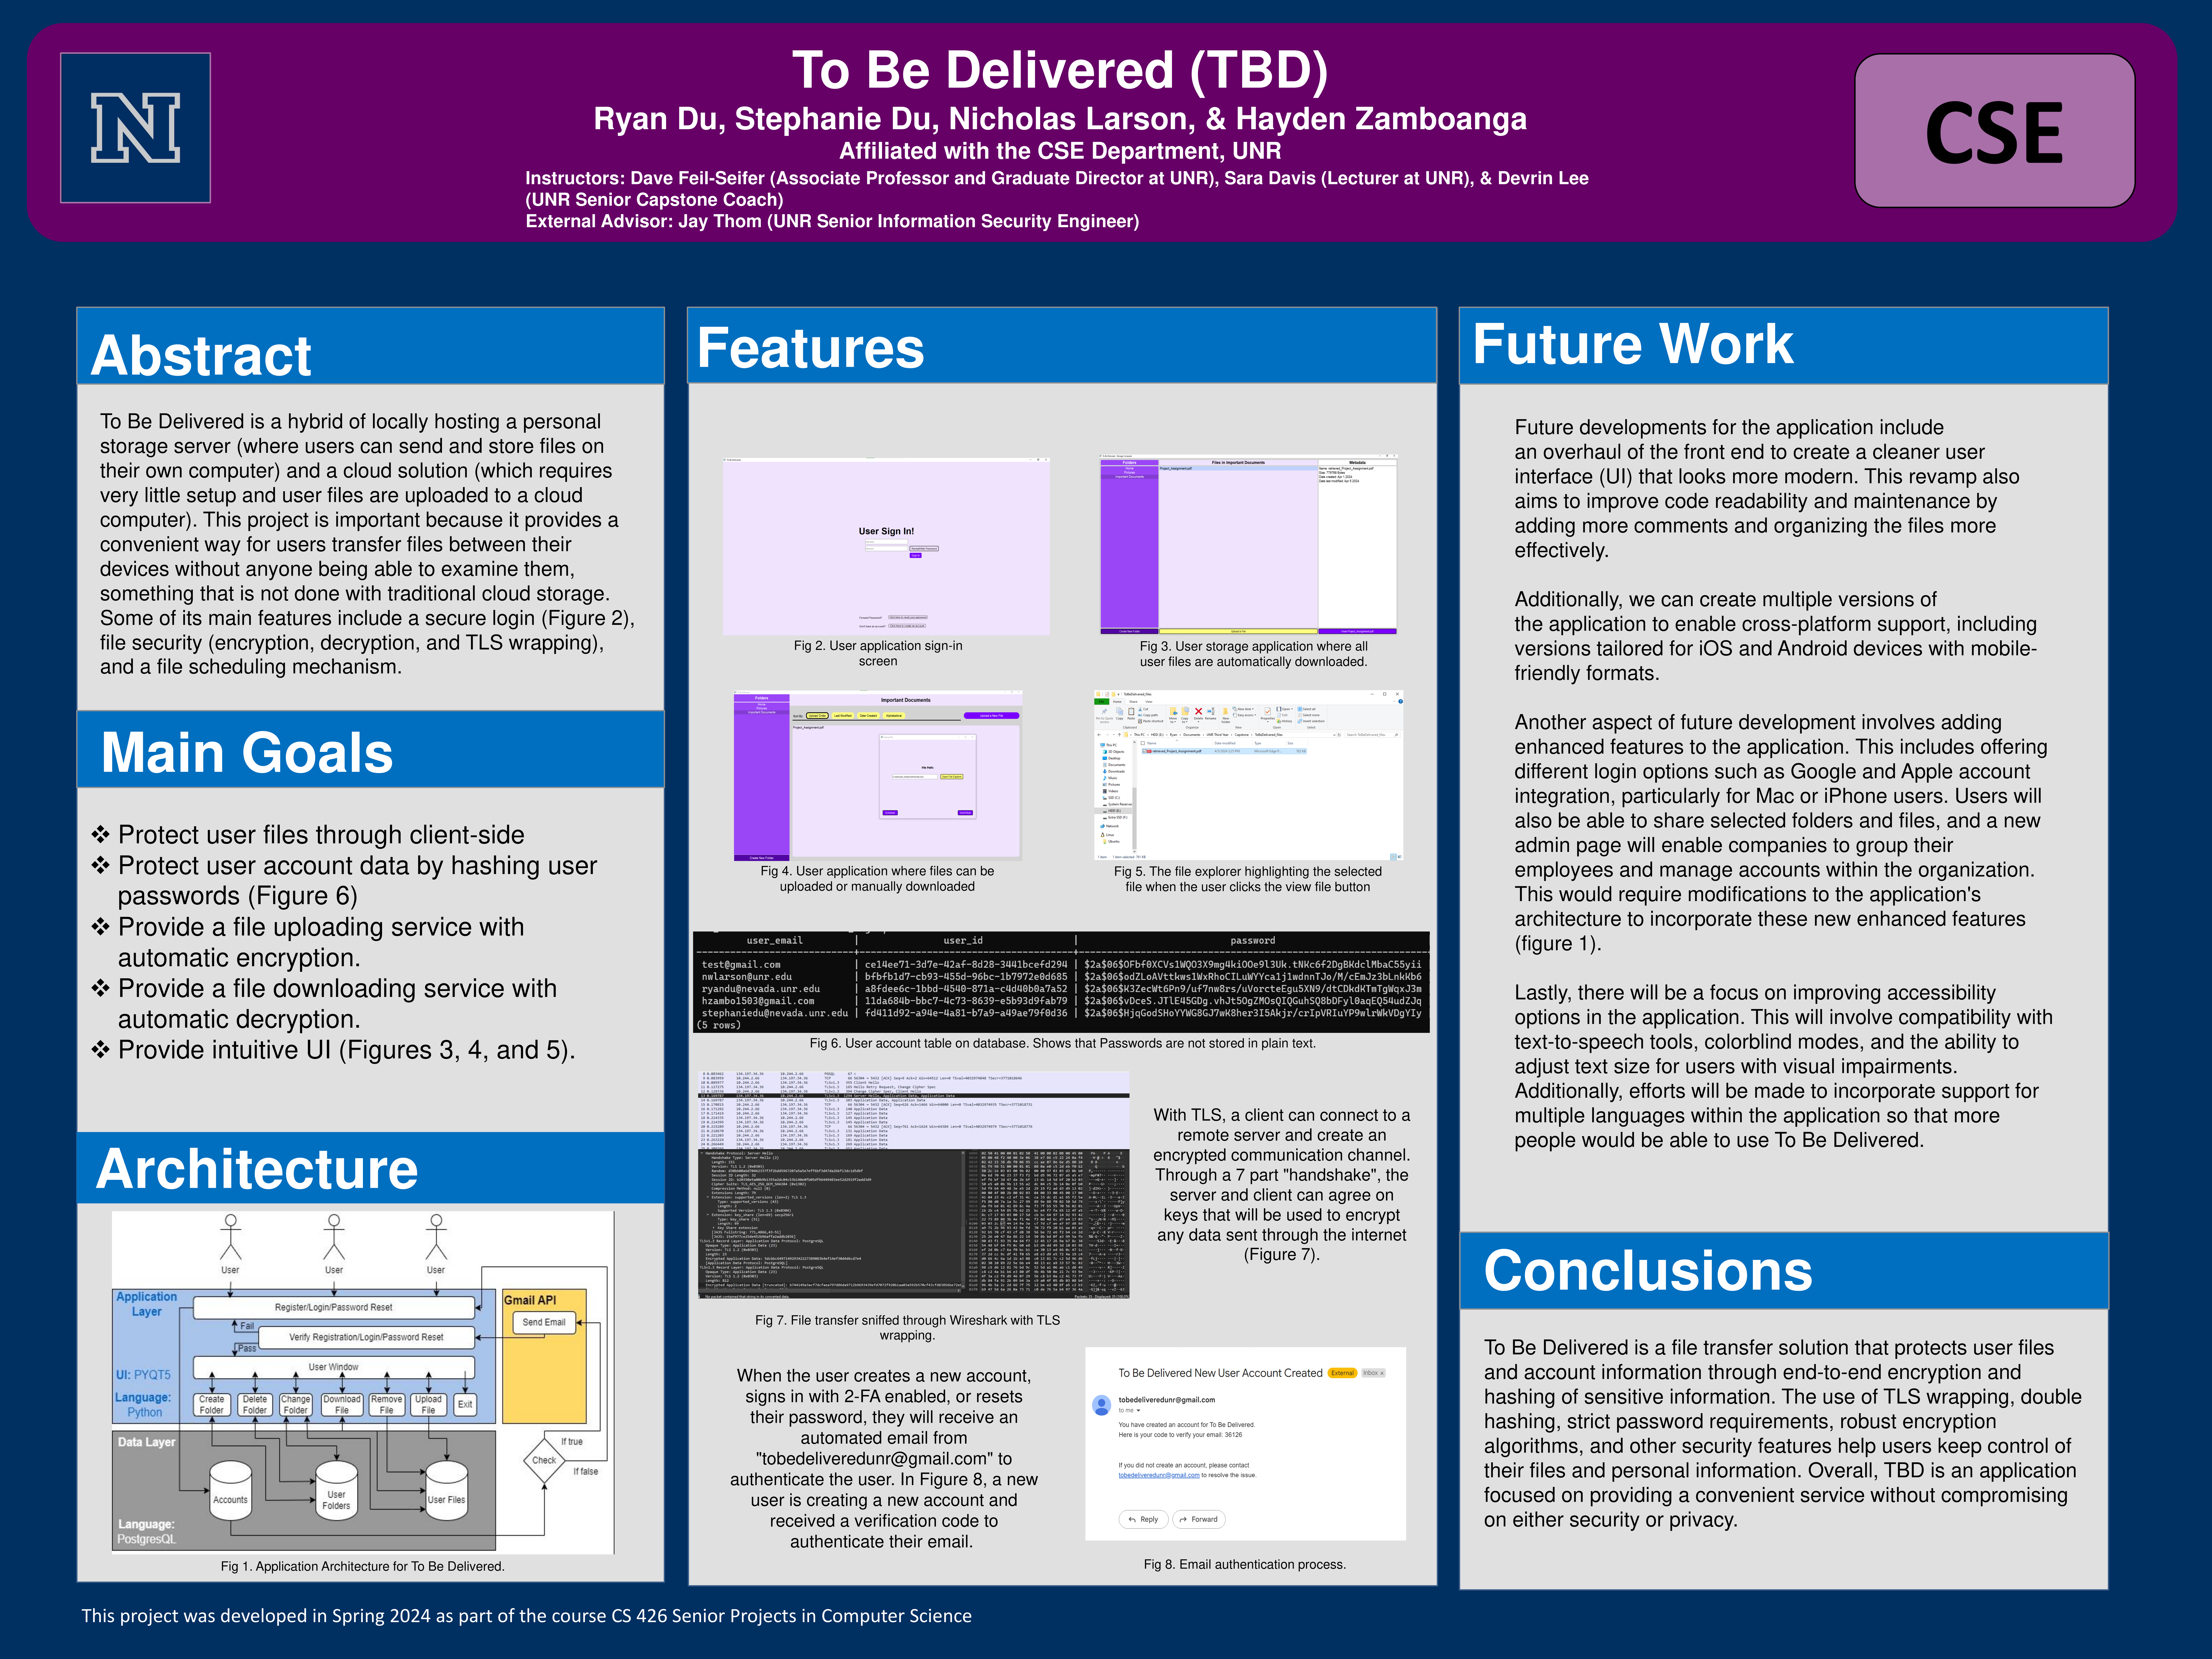 Poster with and abstract section, main goals section, program architecture image, images of the application running, future works section, and conclusion section